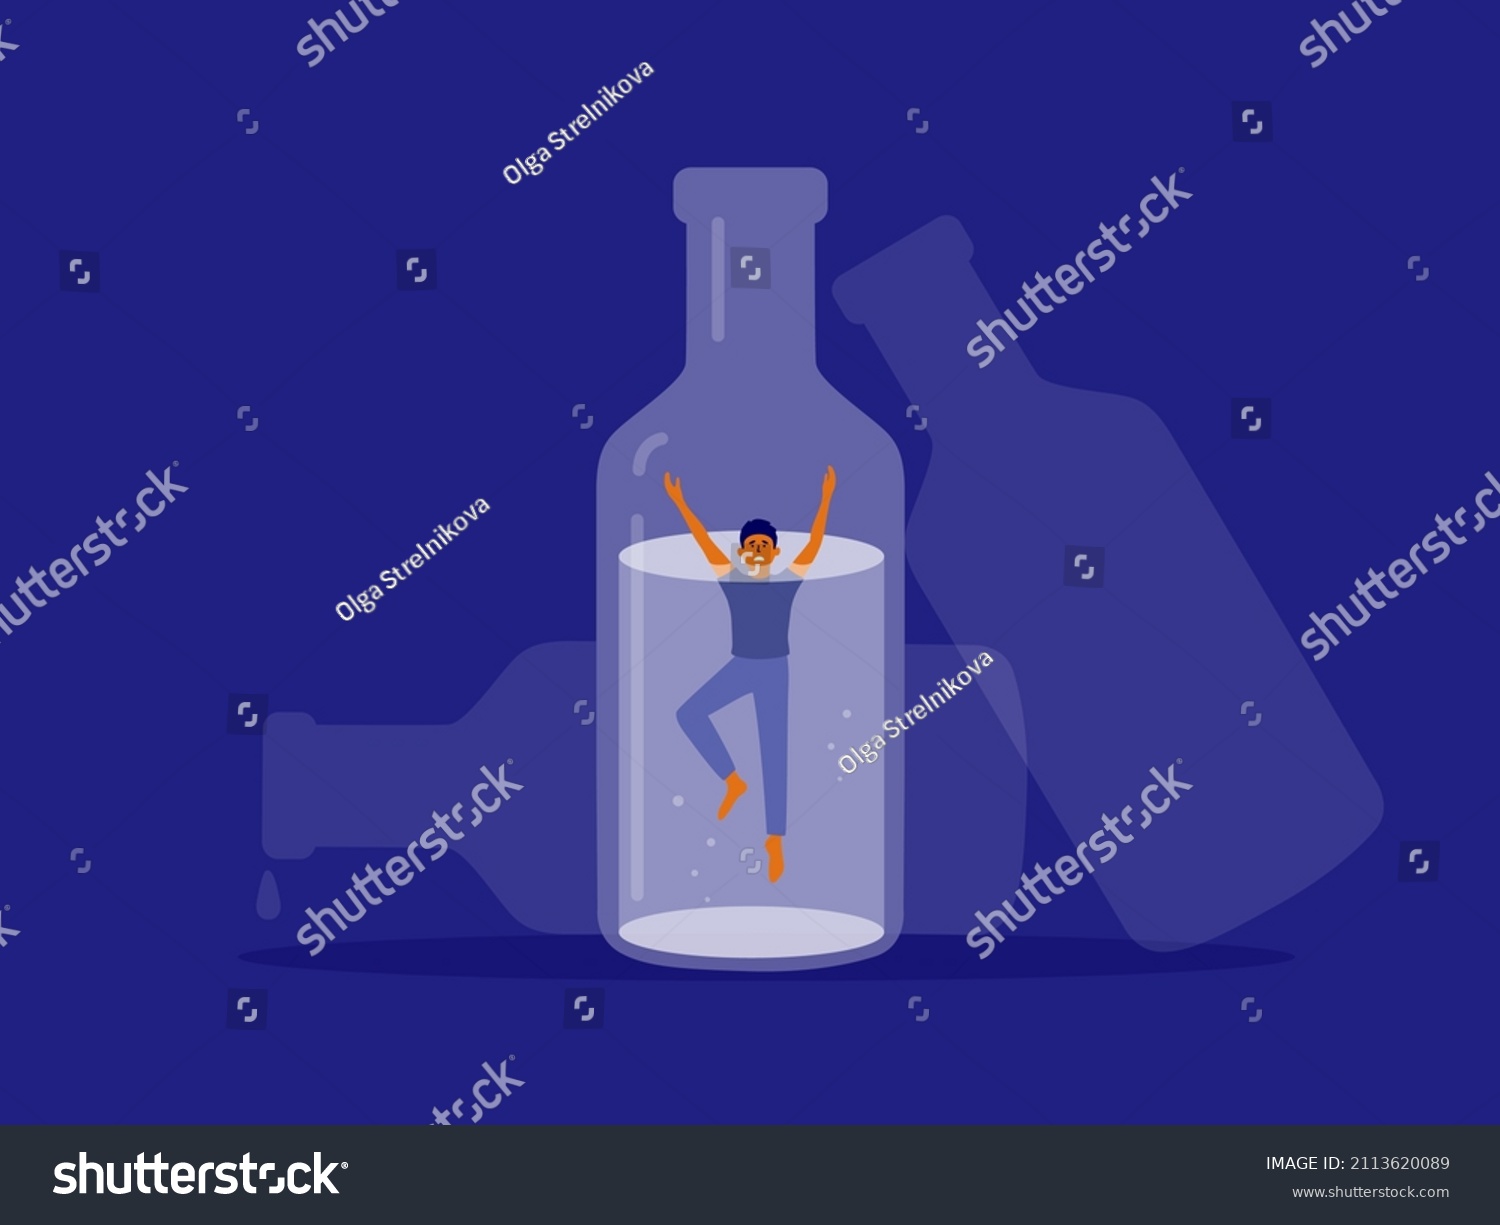 SVG of Alcoholism, alcoholics anonymous. Man drowning in alcohol bottle. Drunk male, drinker guy asking help. Social issue, abuse, addiction. Exhausted alcoholic inside drink bottle. Vector Illustration svg